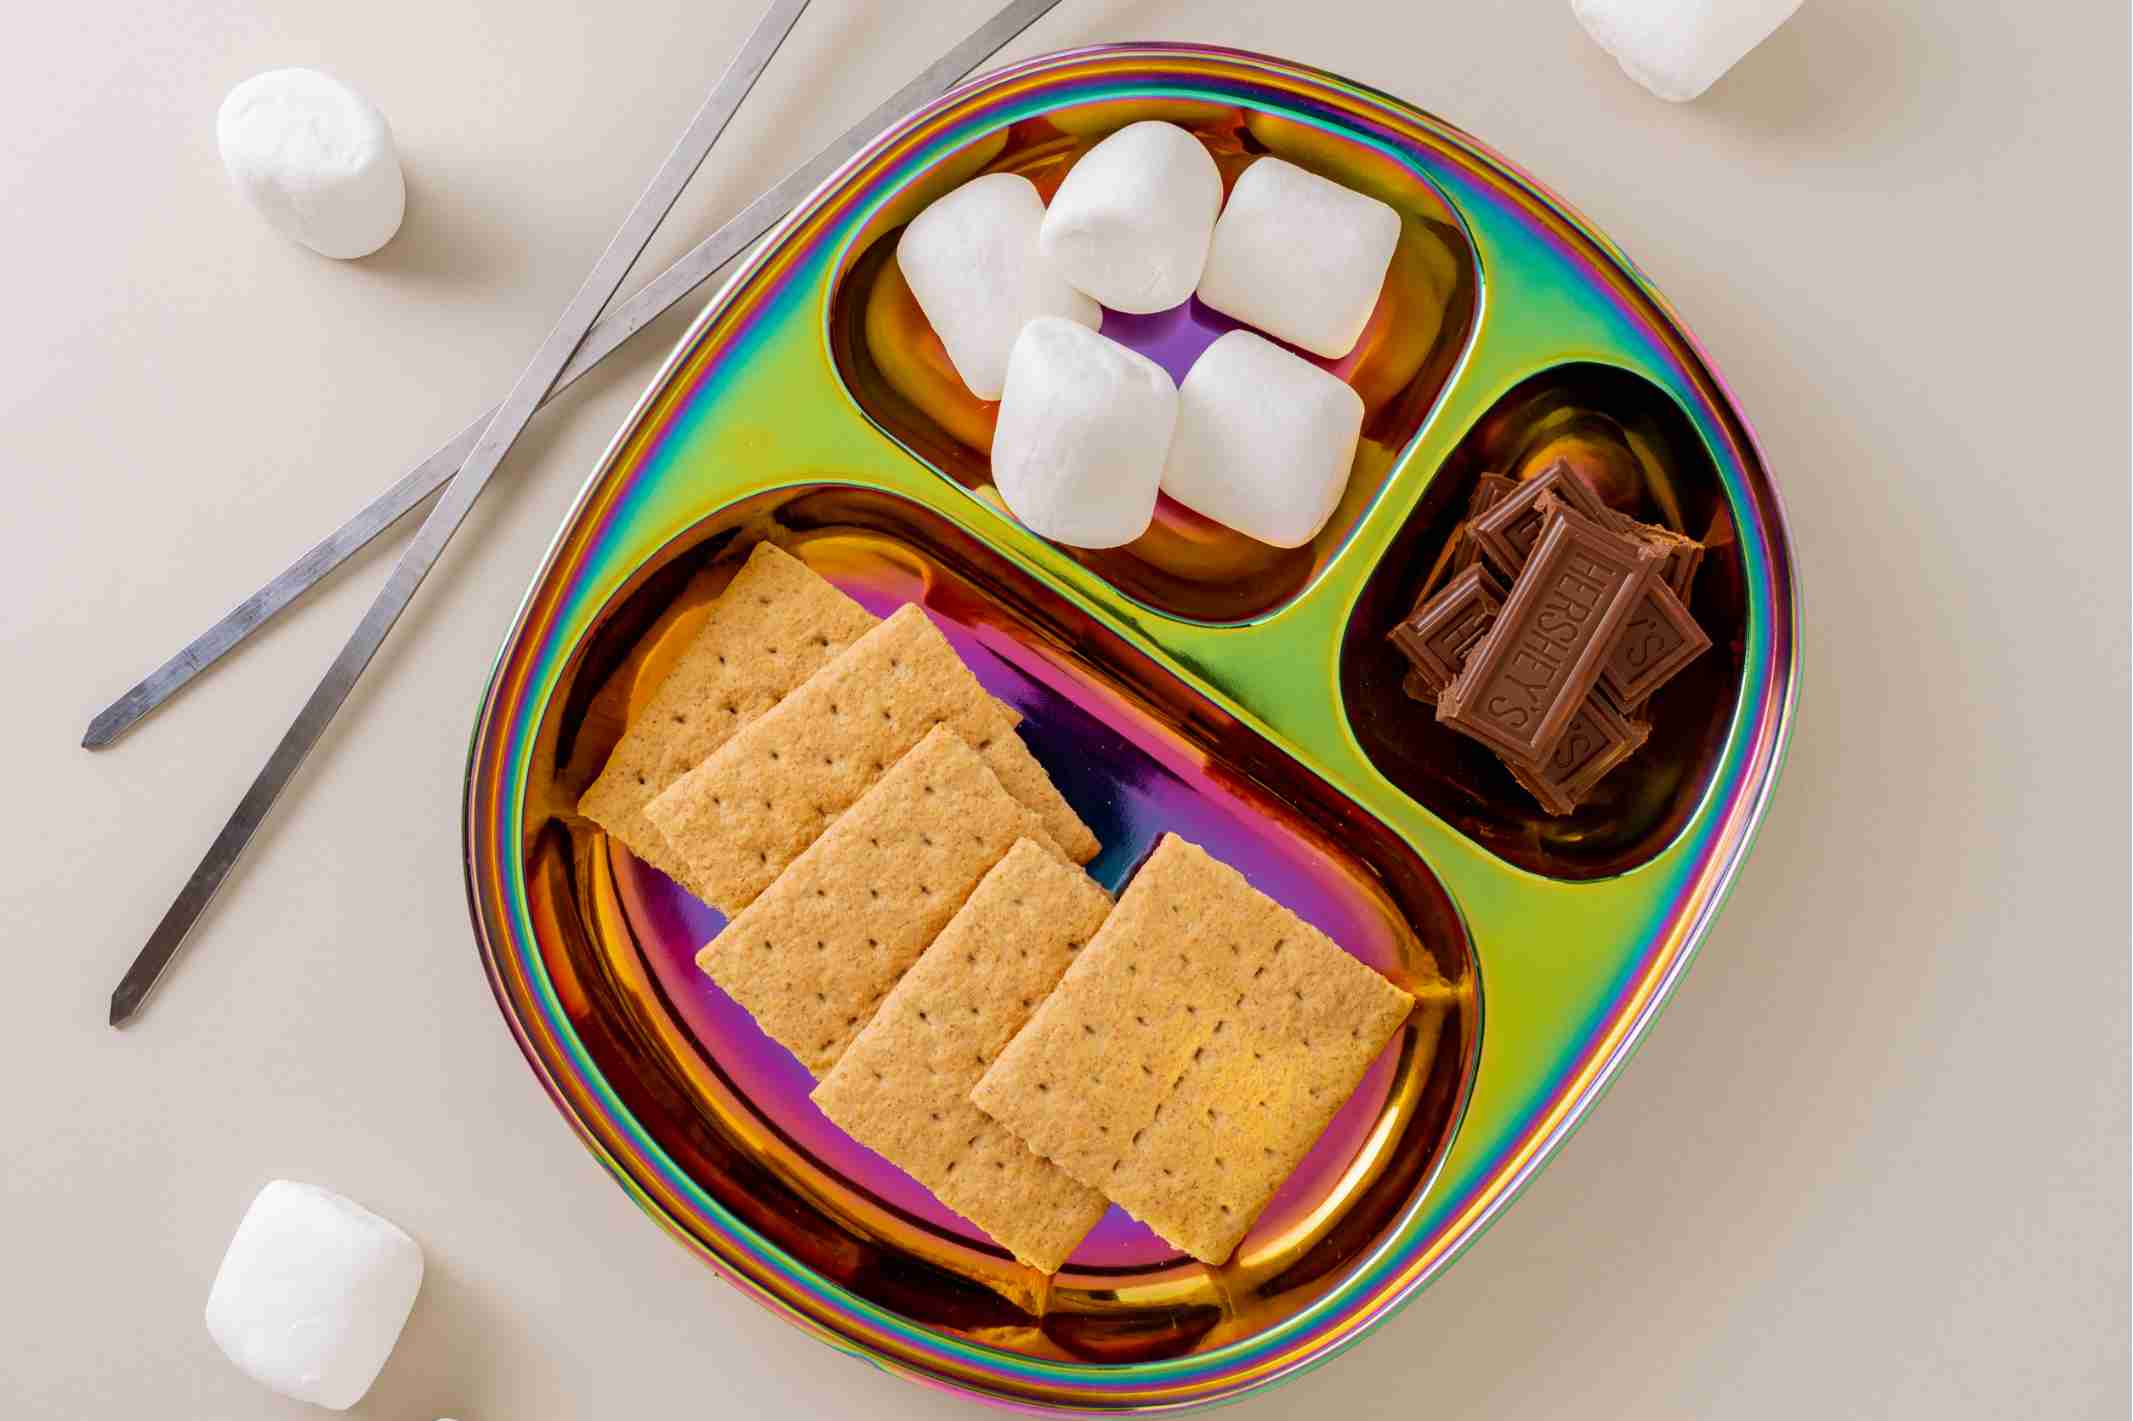 stainless steel plate with smores ingredients